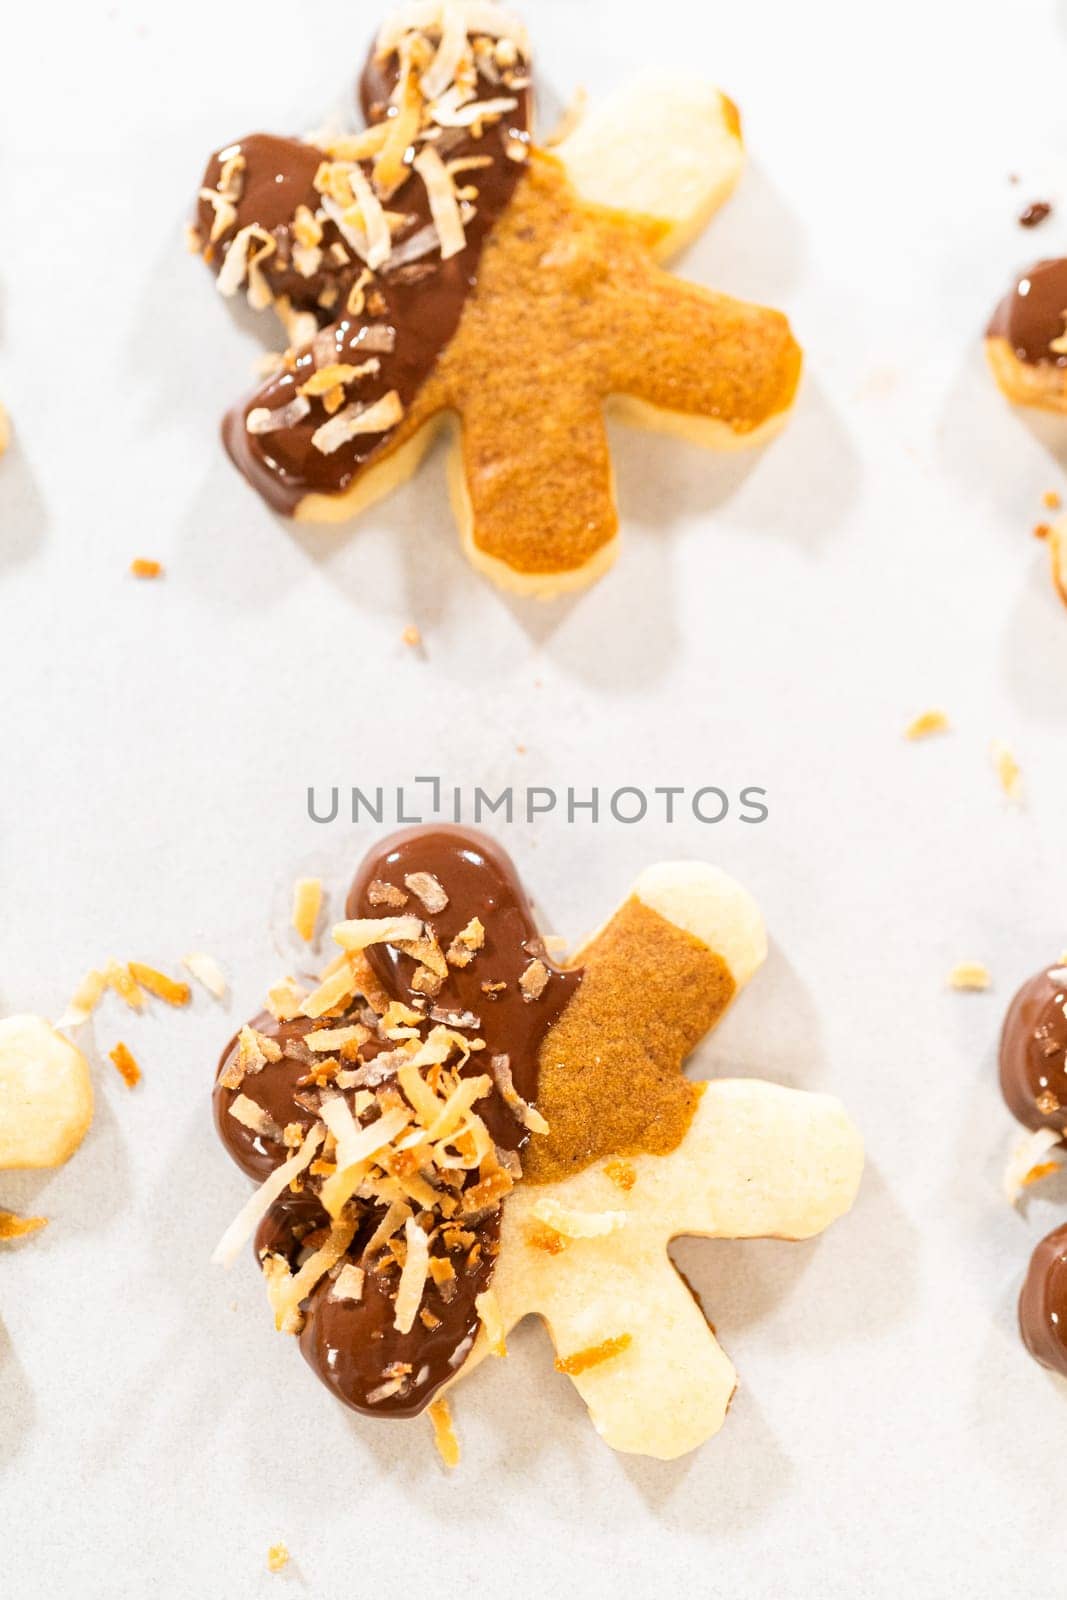 Chocolate-Dipped Gingerbread Men with Golden Toasted Coconut by arinahabich